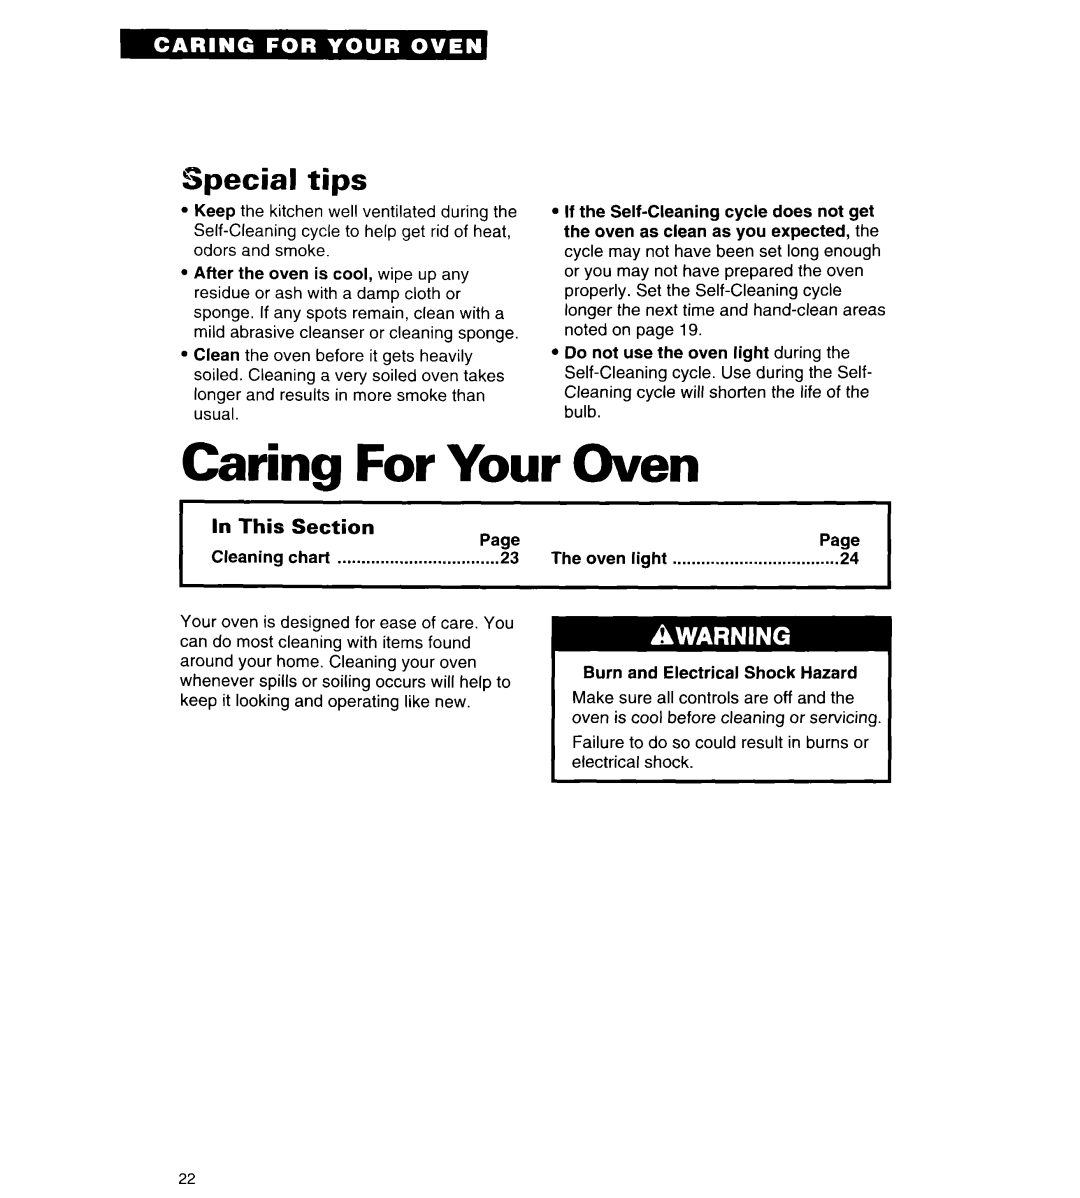 Whirlpool RB262PXA important safety instructions Caring For Your Oven, Special tips 